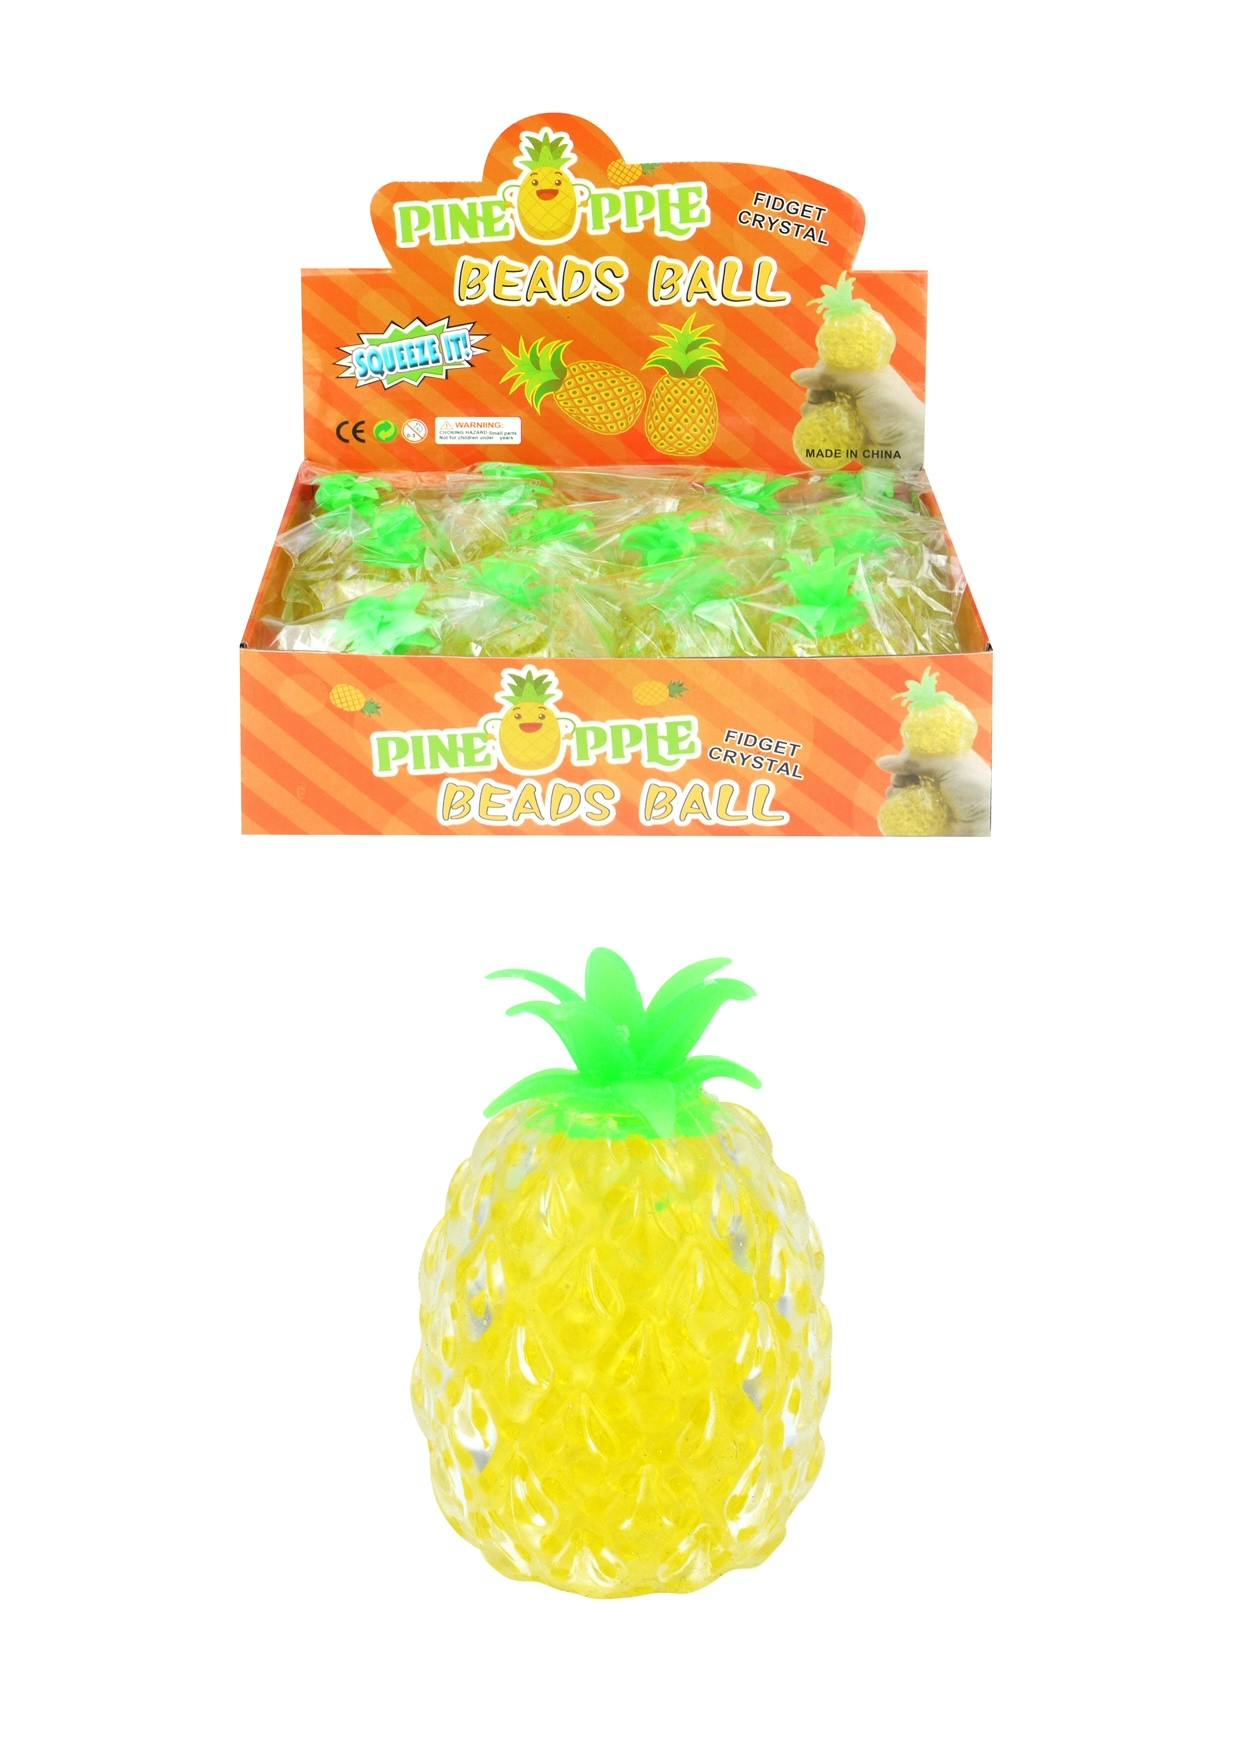 Squishy Pineapple - Product image